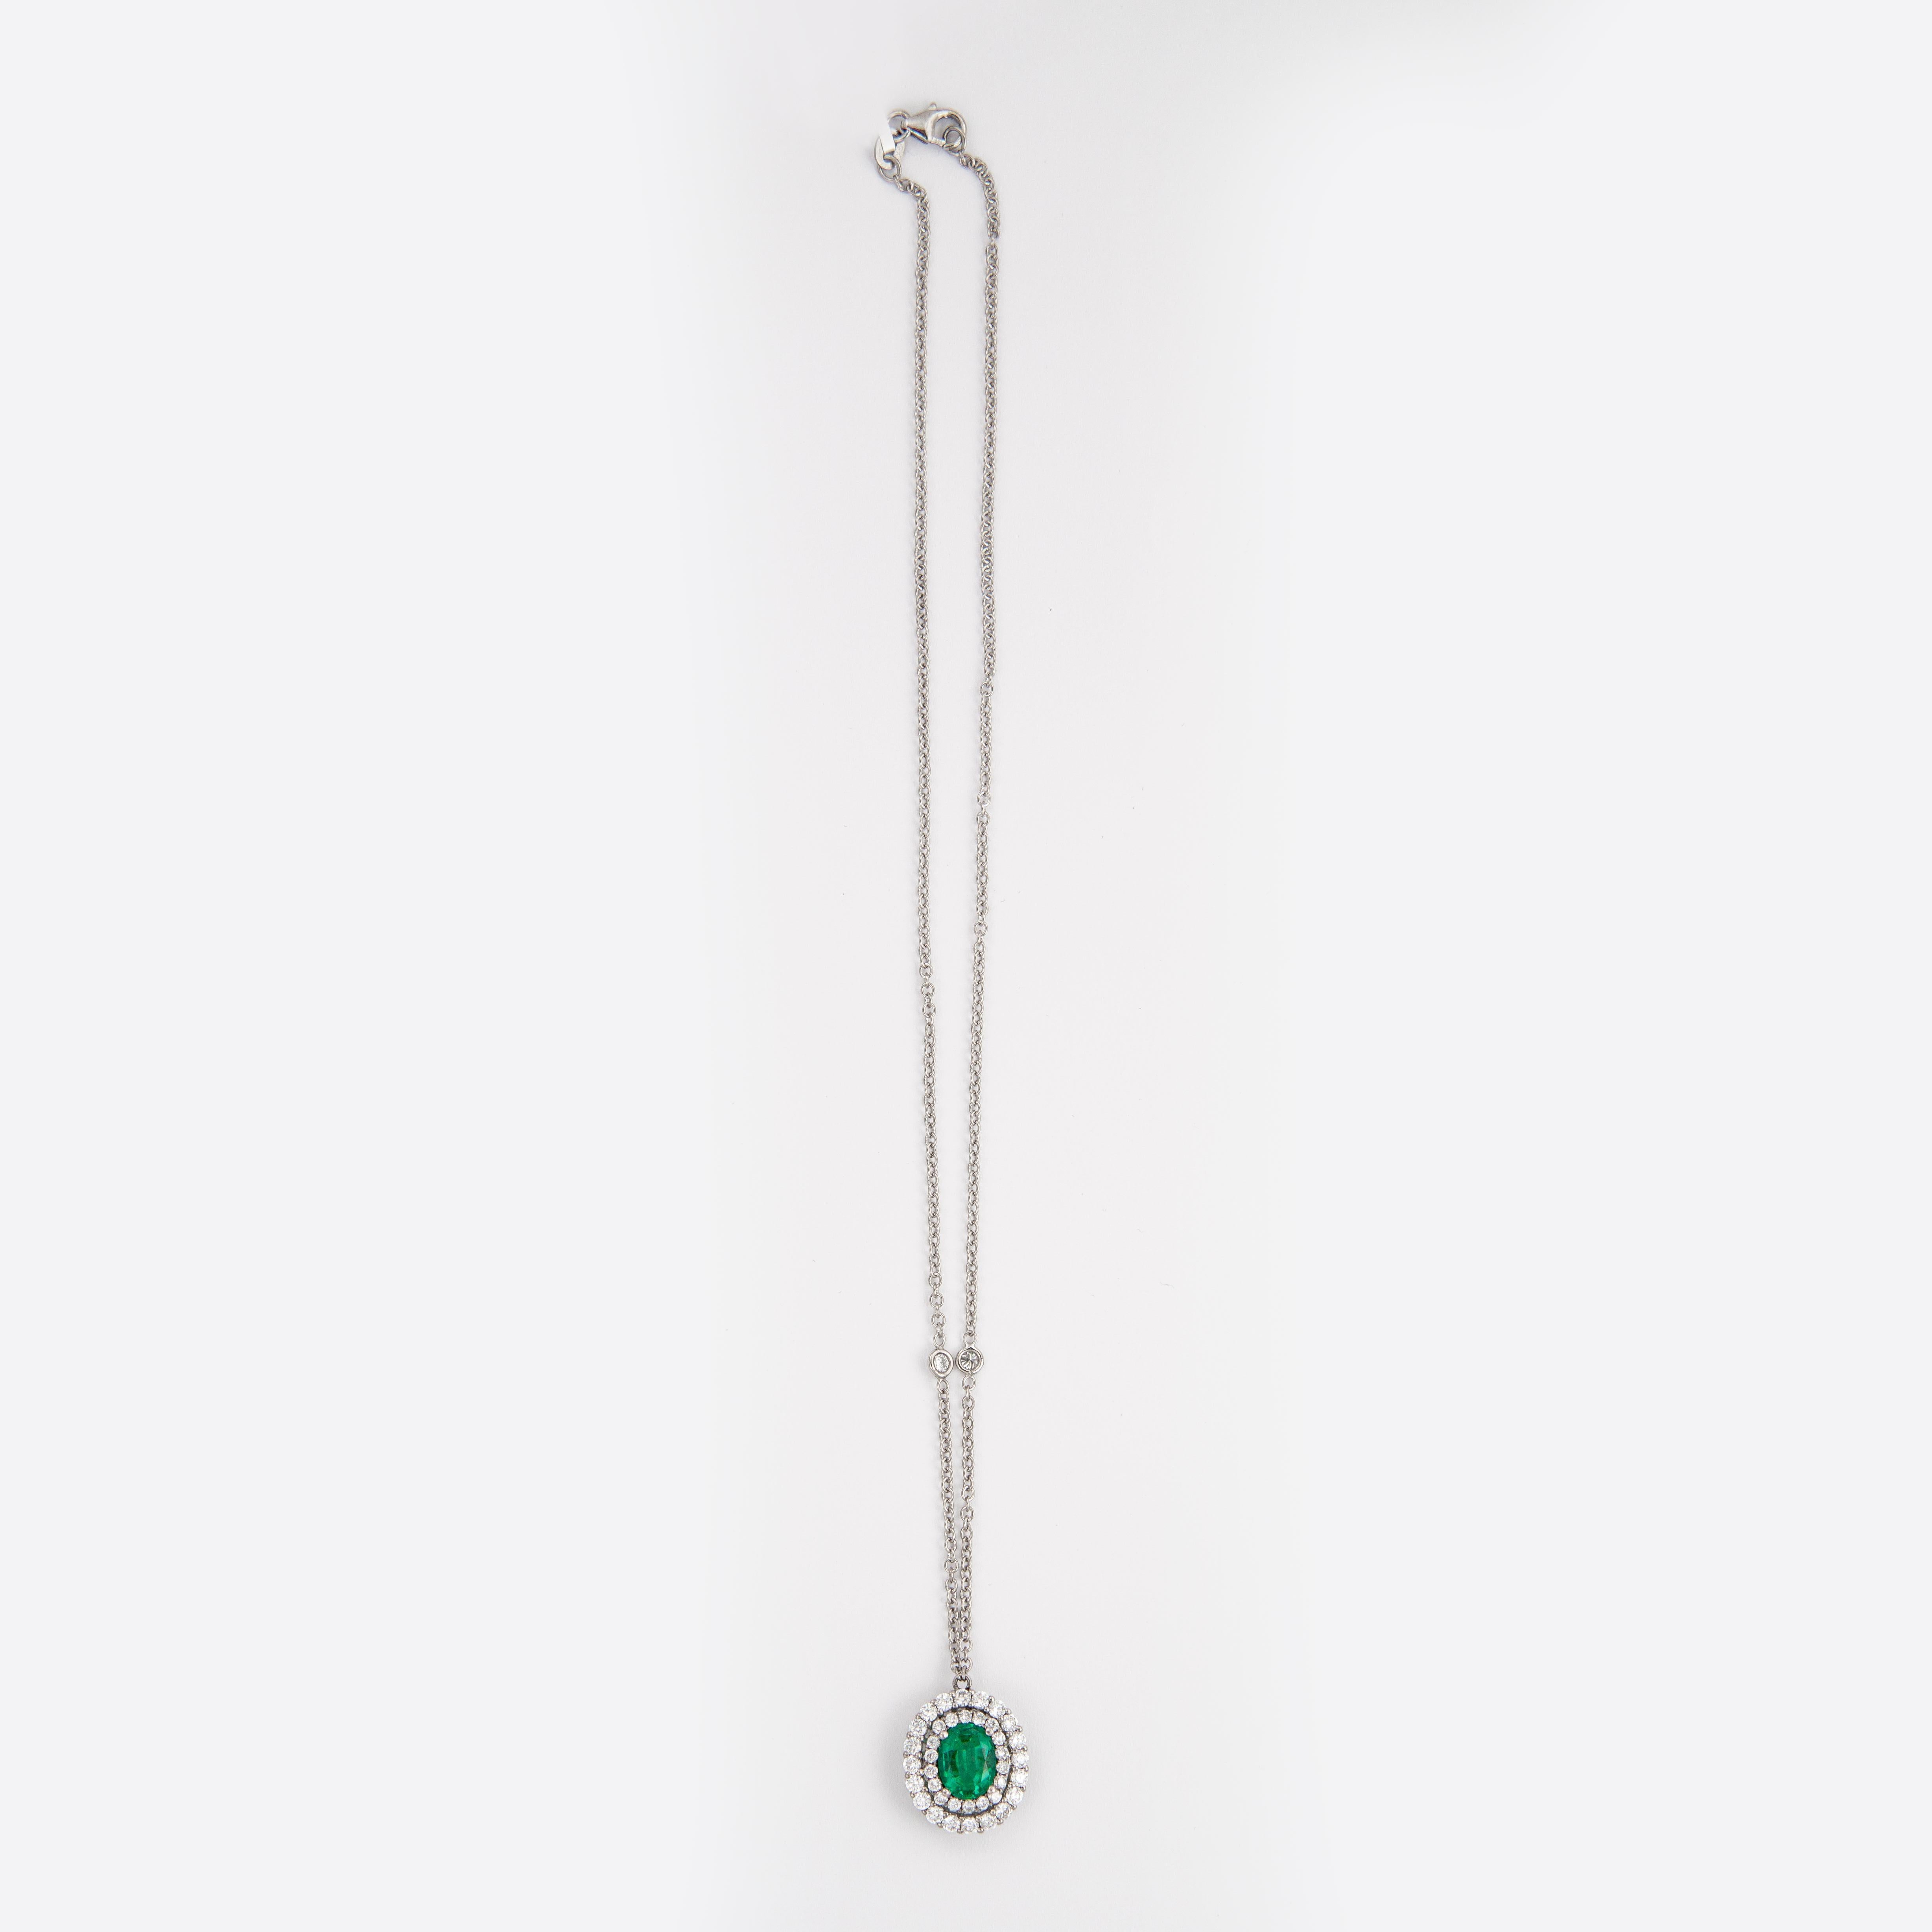 Contemporary Alexander 1.78ct Oval Emerald with Diamond Halo 18k White Gold Pendant Necklace